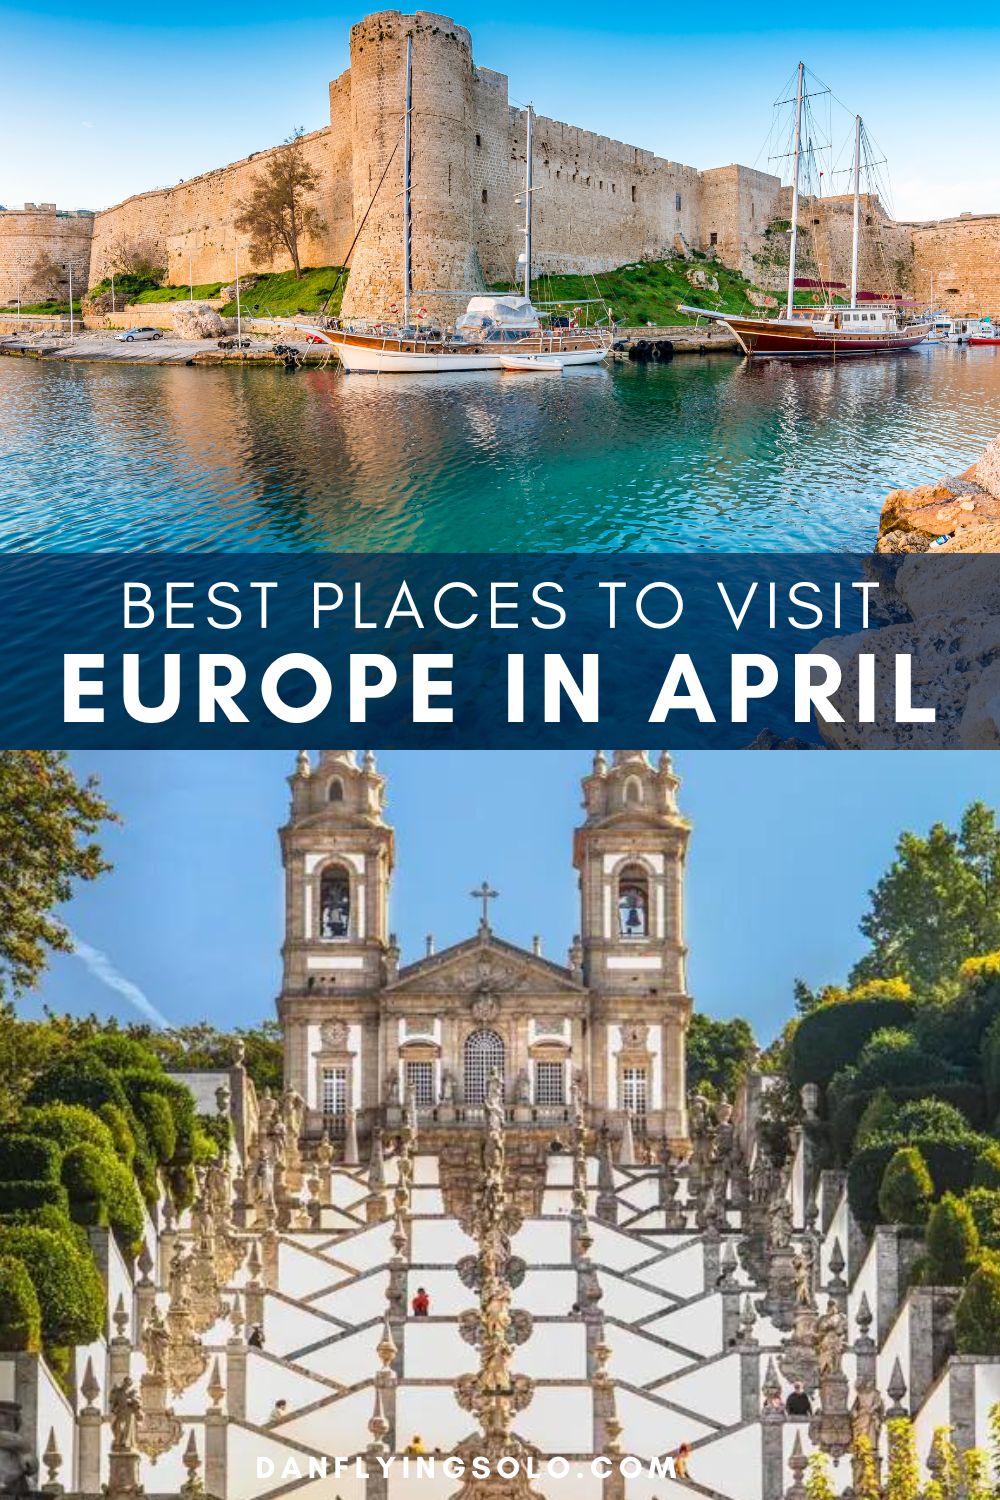 Discover some of the best places to visit in April for a European city break, an Easter getaway, and some of Europe's warmest places.